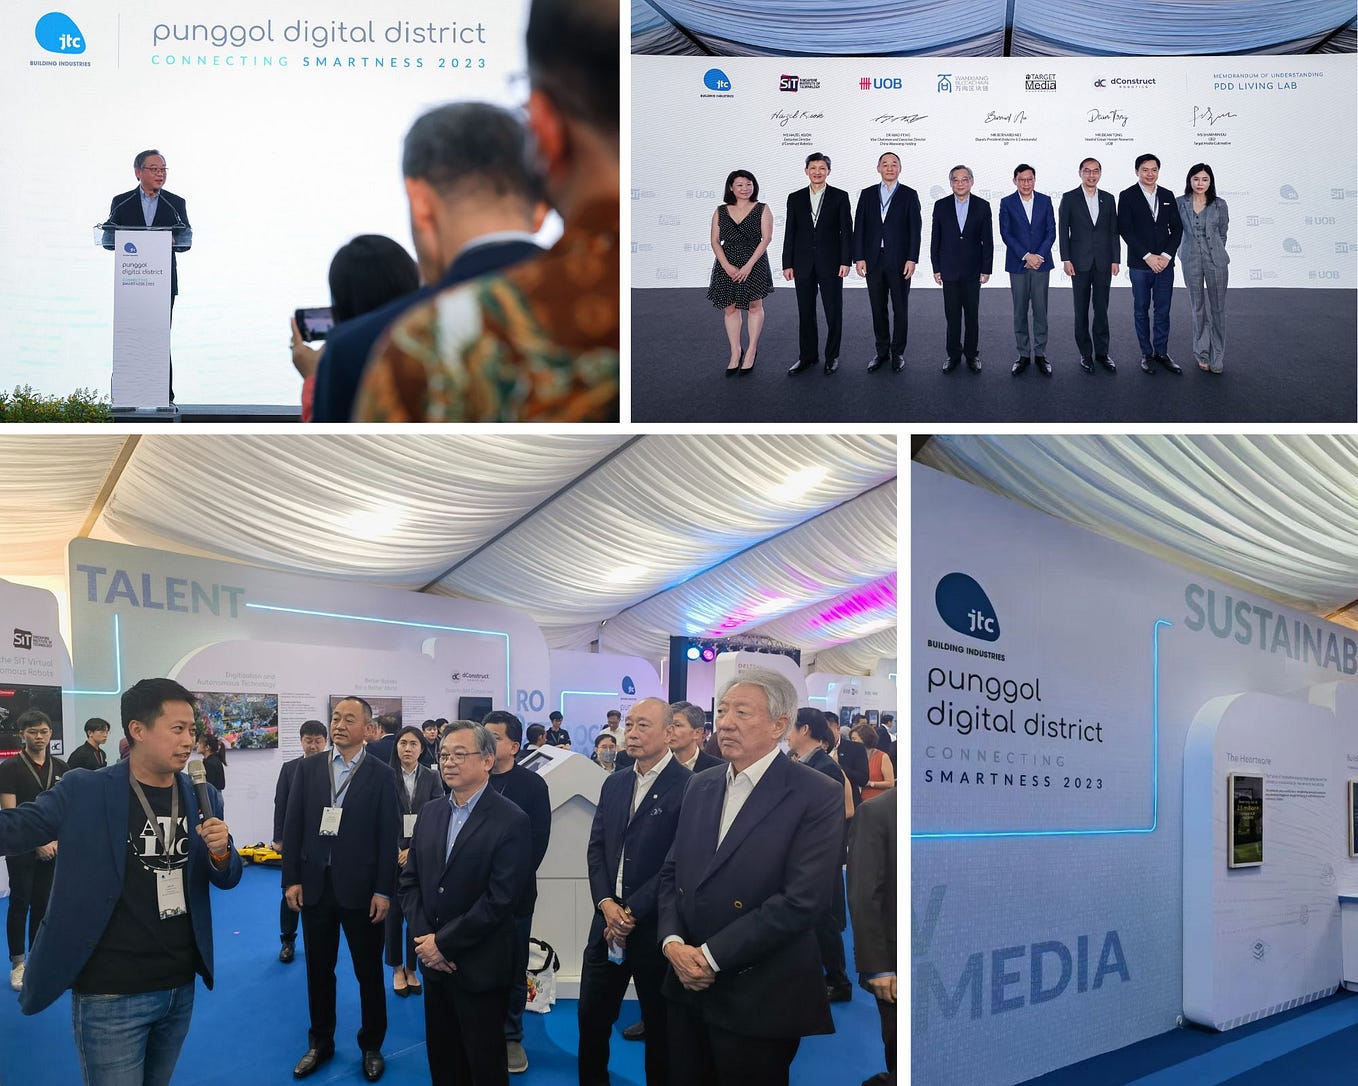 aitos.io Invited to Attend Singapore’s Punggol Digital District (PDD) Connecting Smartness 2023…